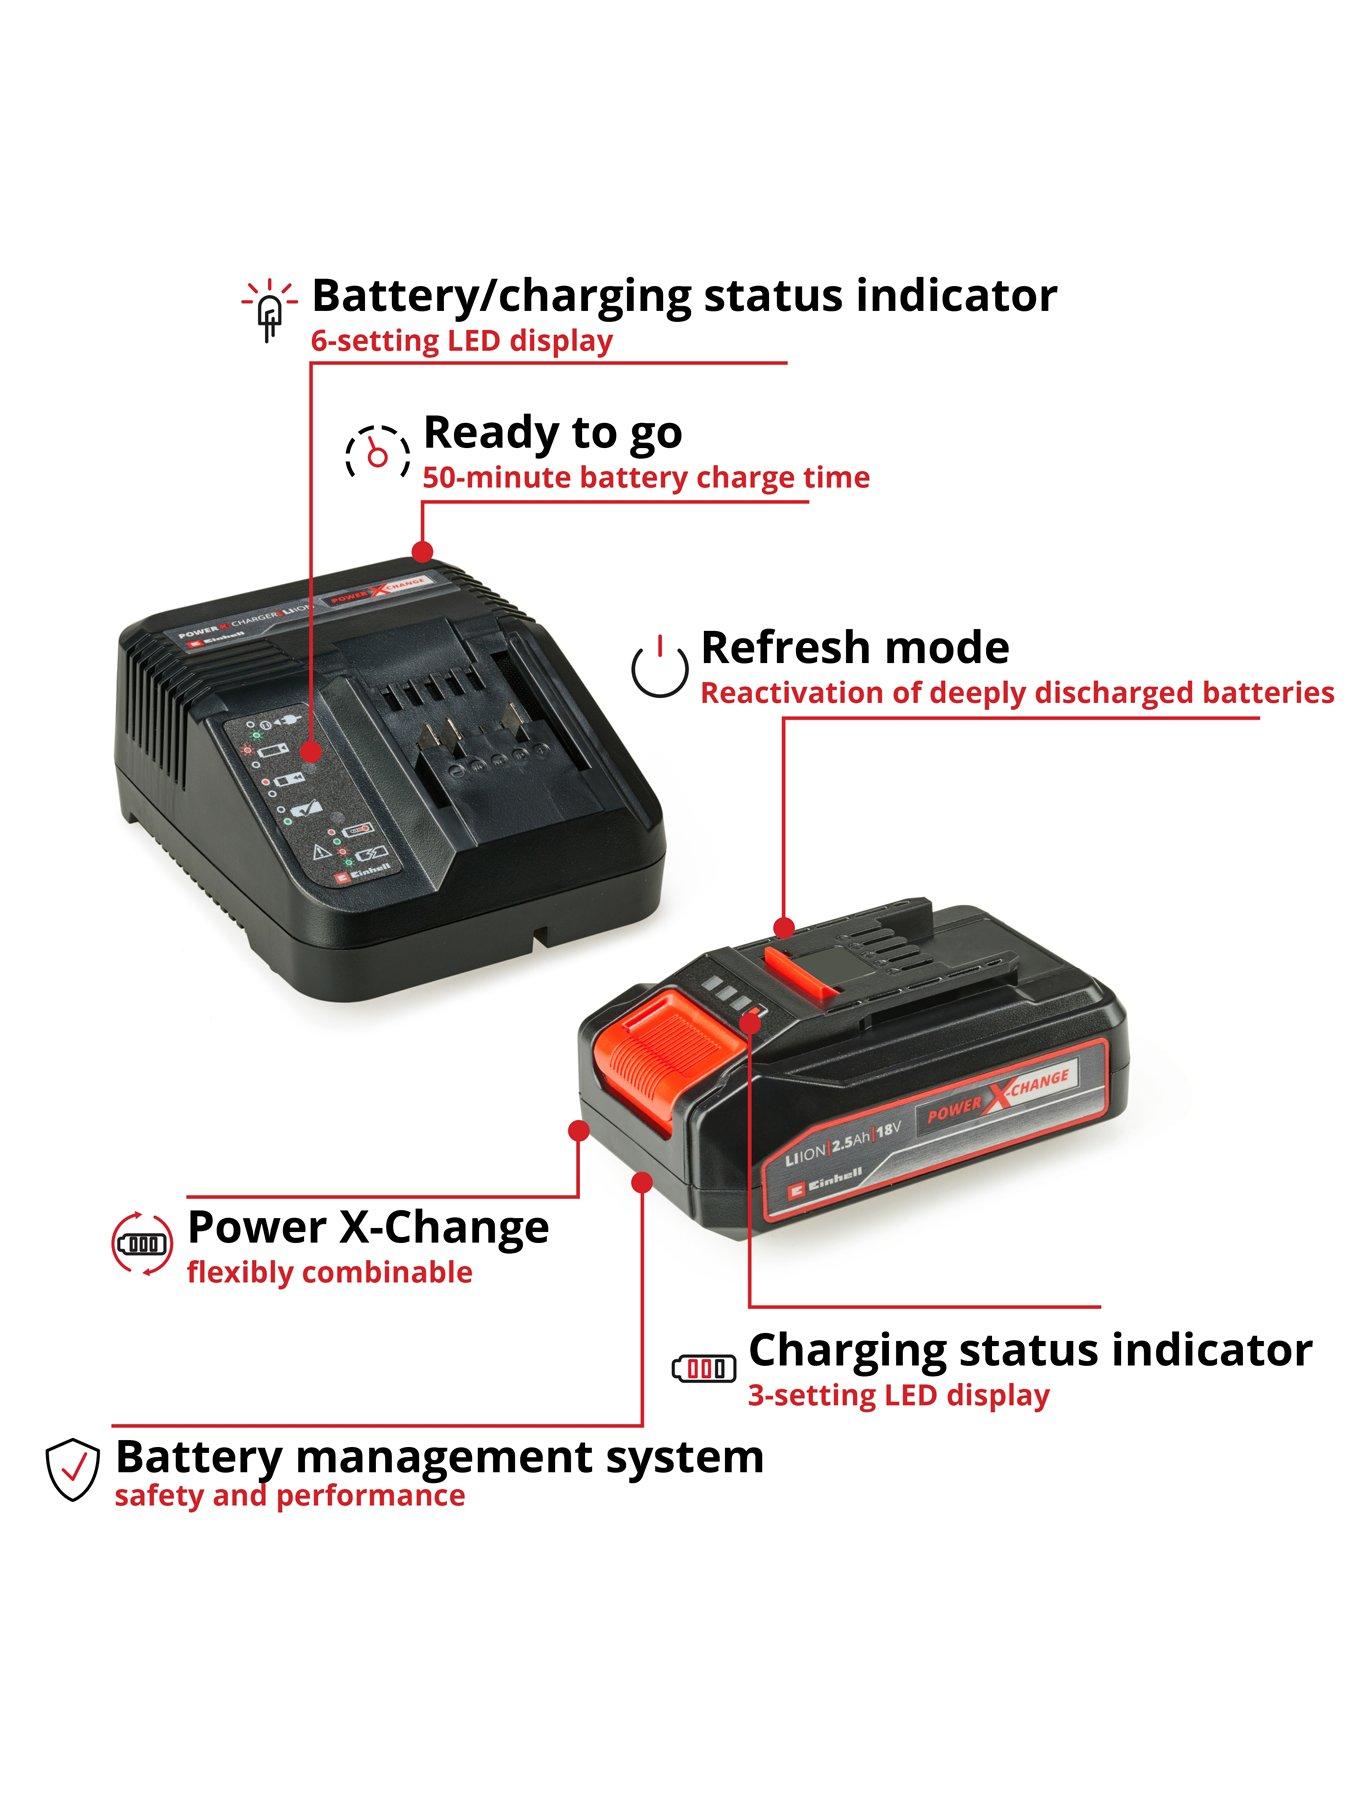 Einhell 18-Volt Power X-Change 3.0-Ah Starter Kit, Battery and Fast Charger